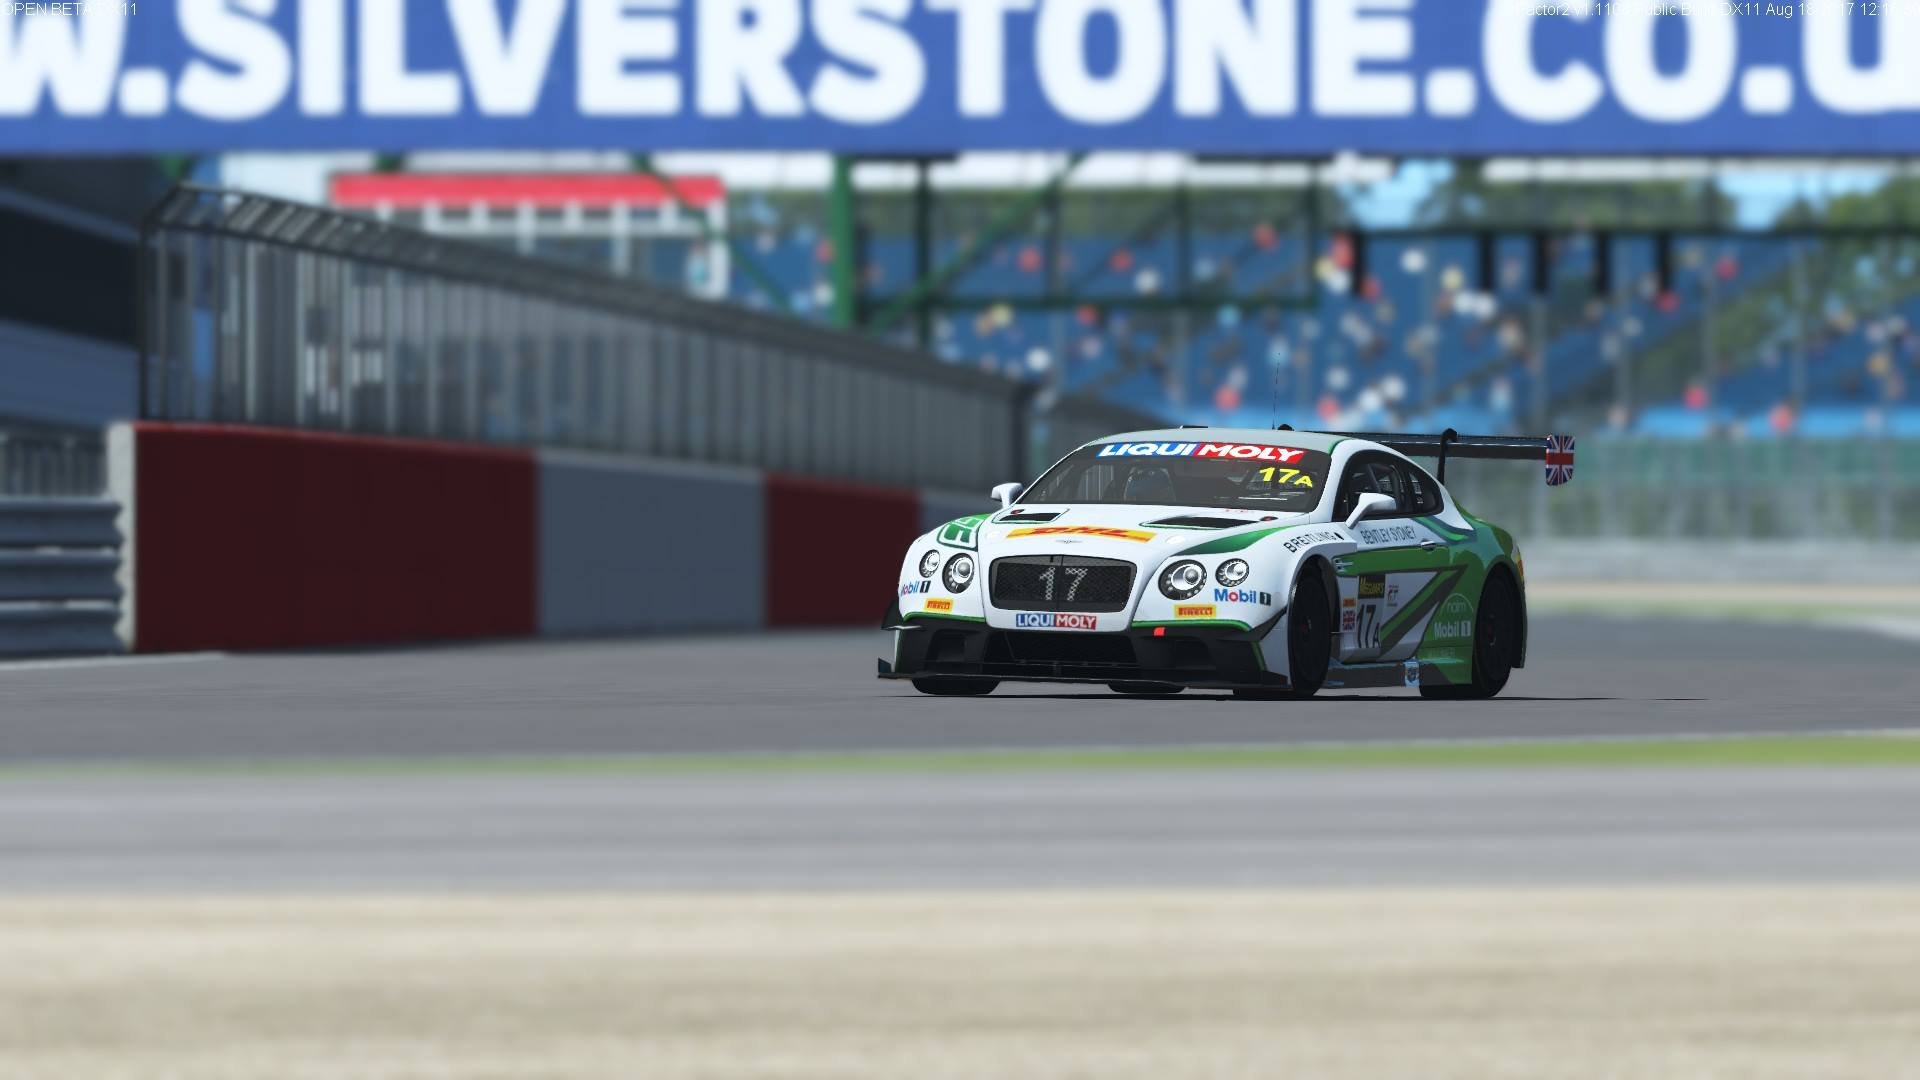 More information about "rFactor 2: Bentley Continental GT3 by Studio 397 in arrivo"